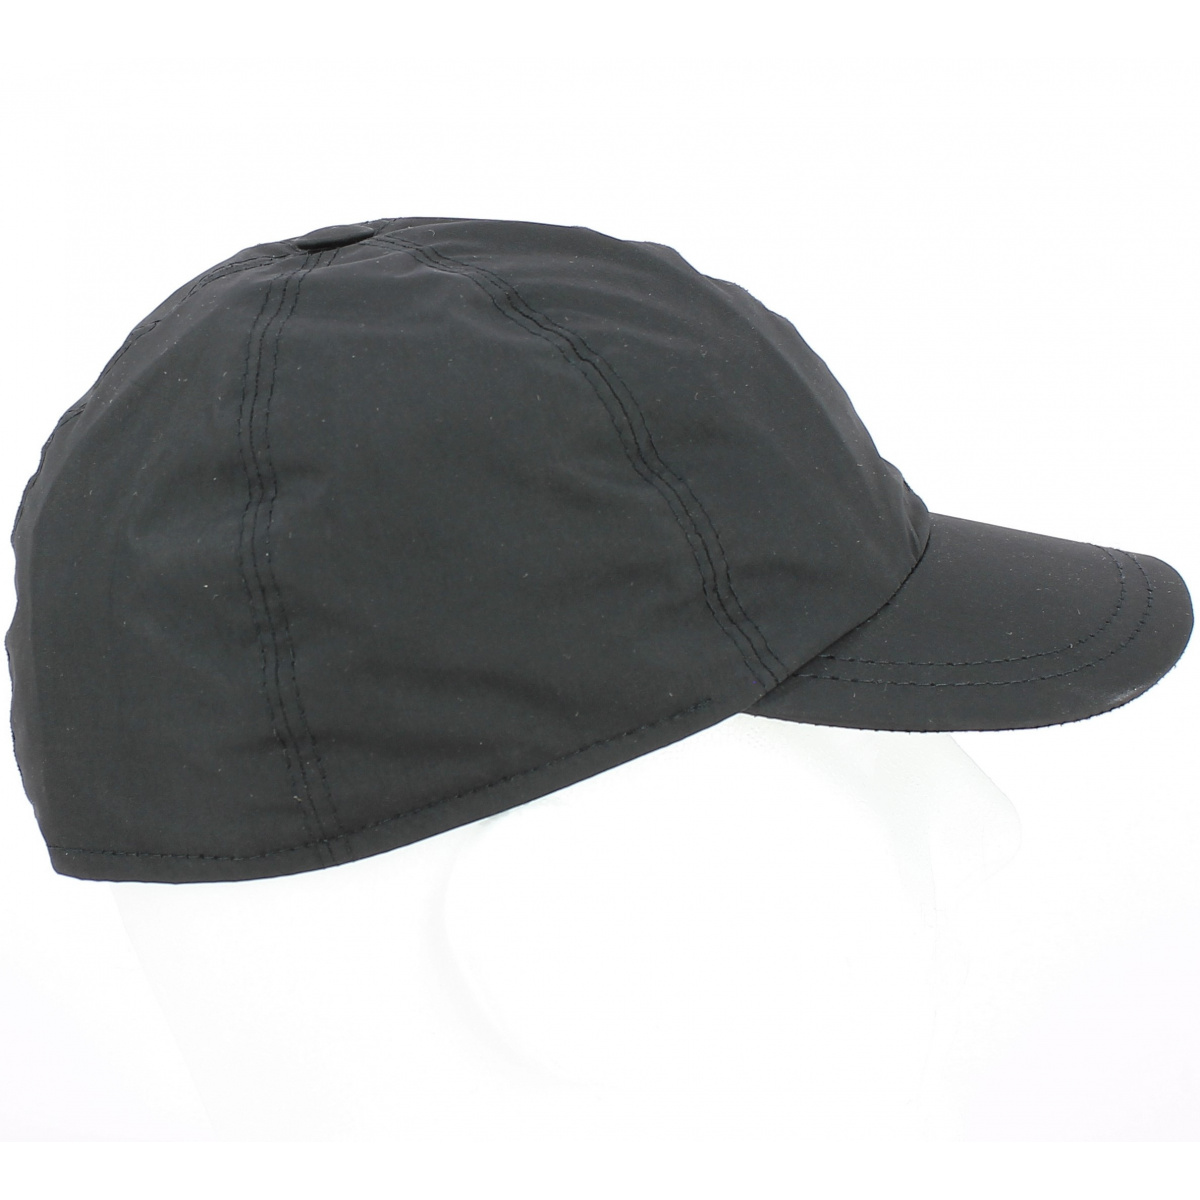 goretex cap Reference : 6542 | Chapellerie Traclet